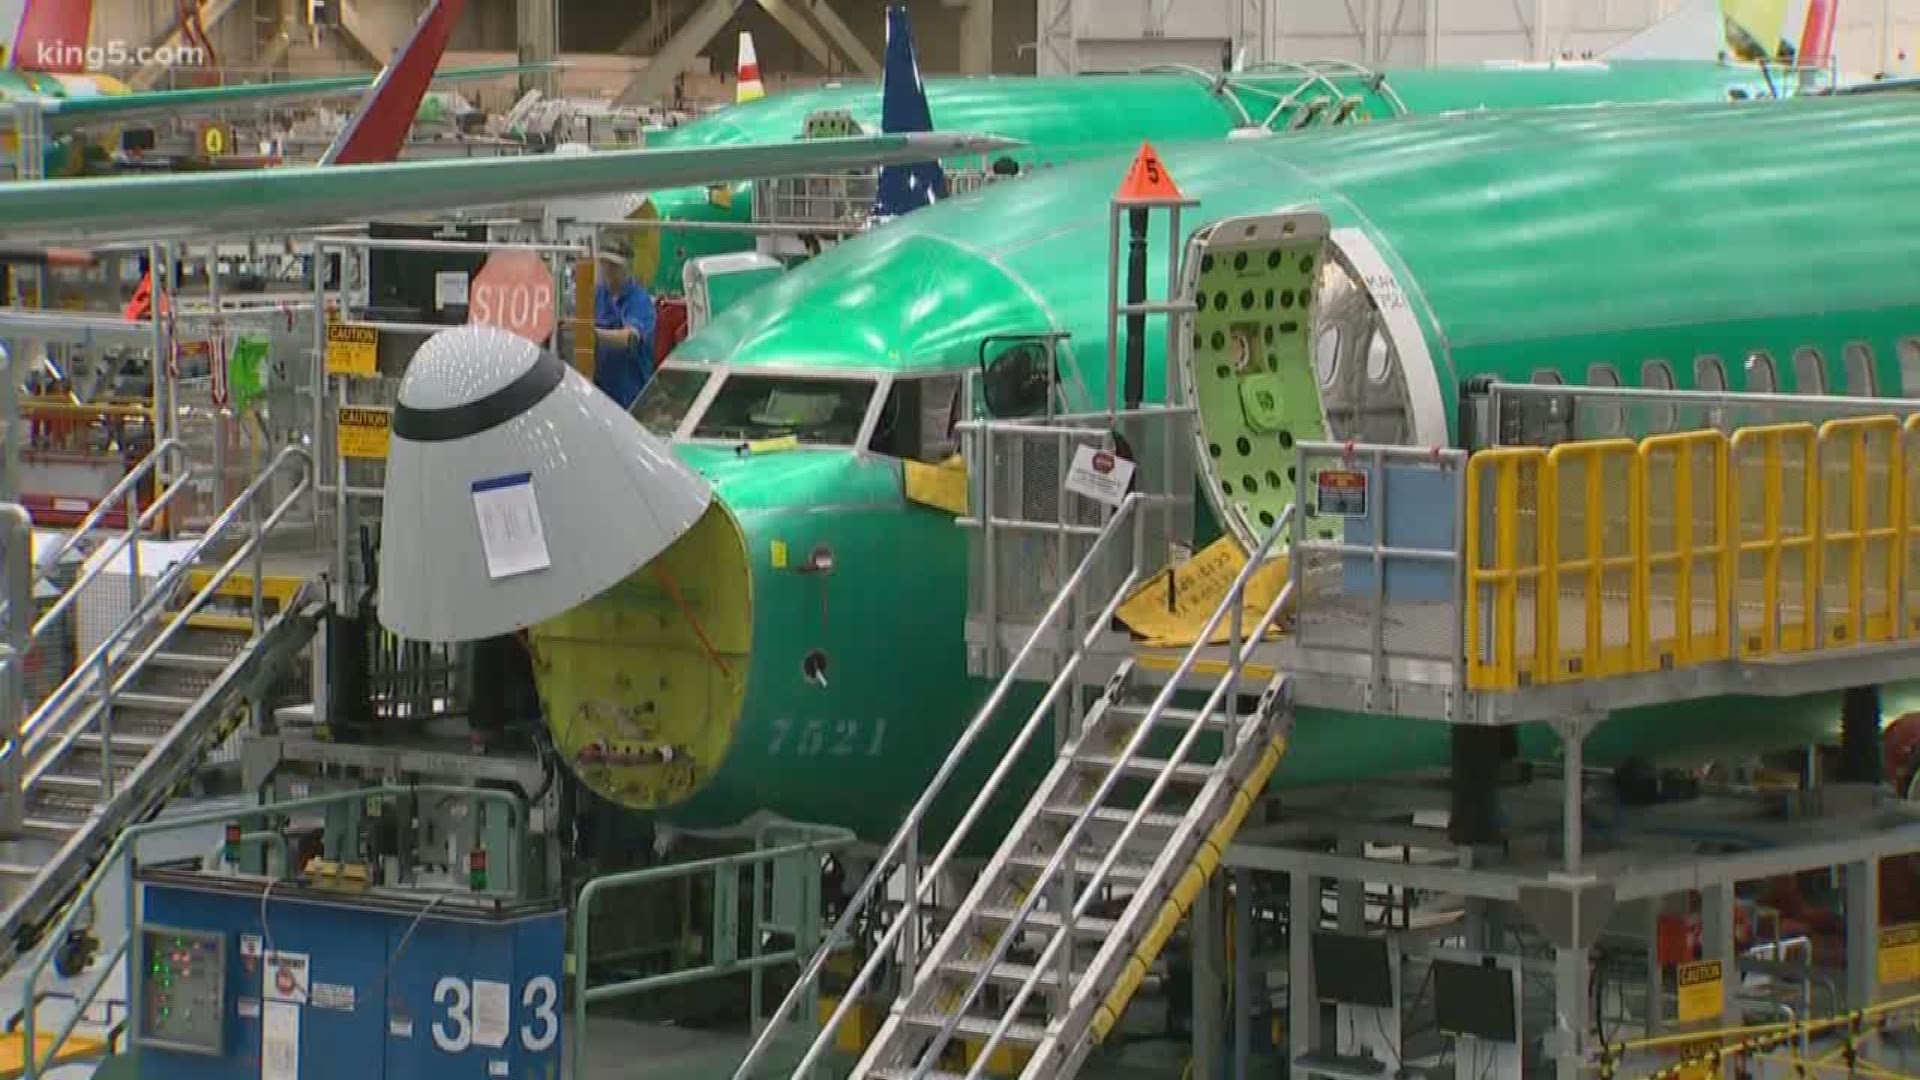 Boeing is hosting hundreds of pilots and airline executives at its Renton plant today, and briefing the media on what it plans to do to fix its 737 Max jets. The global fleet was grounded in the wake of two deadly crashes, the second one just two weeks ago in Ethiopia. KING 5's Aviation Specialist Glenn Farley reports.